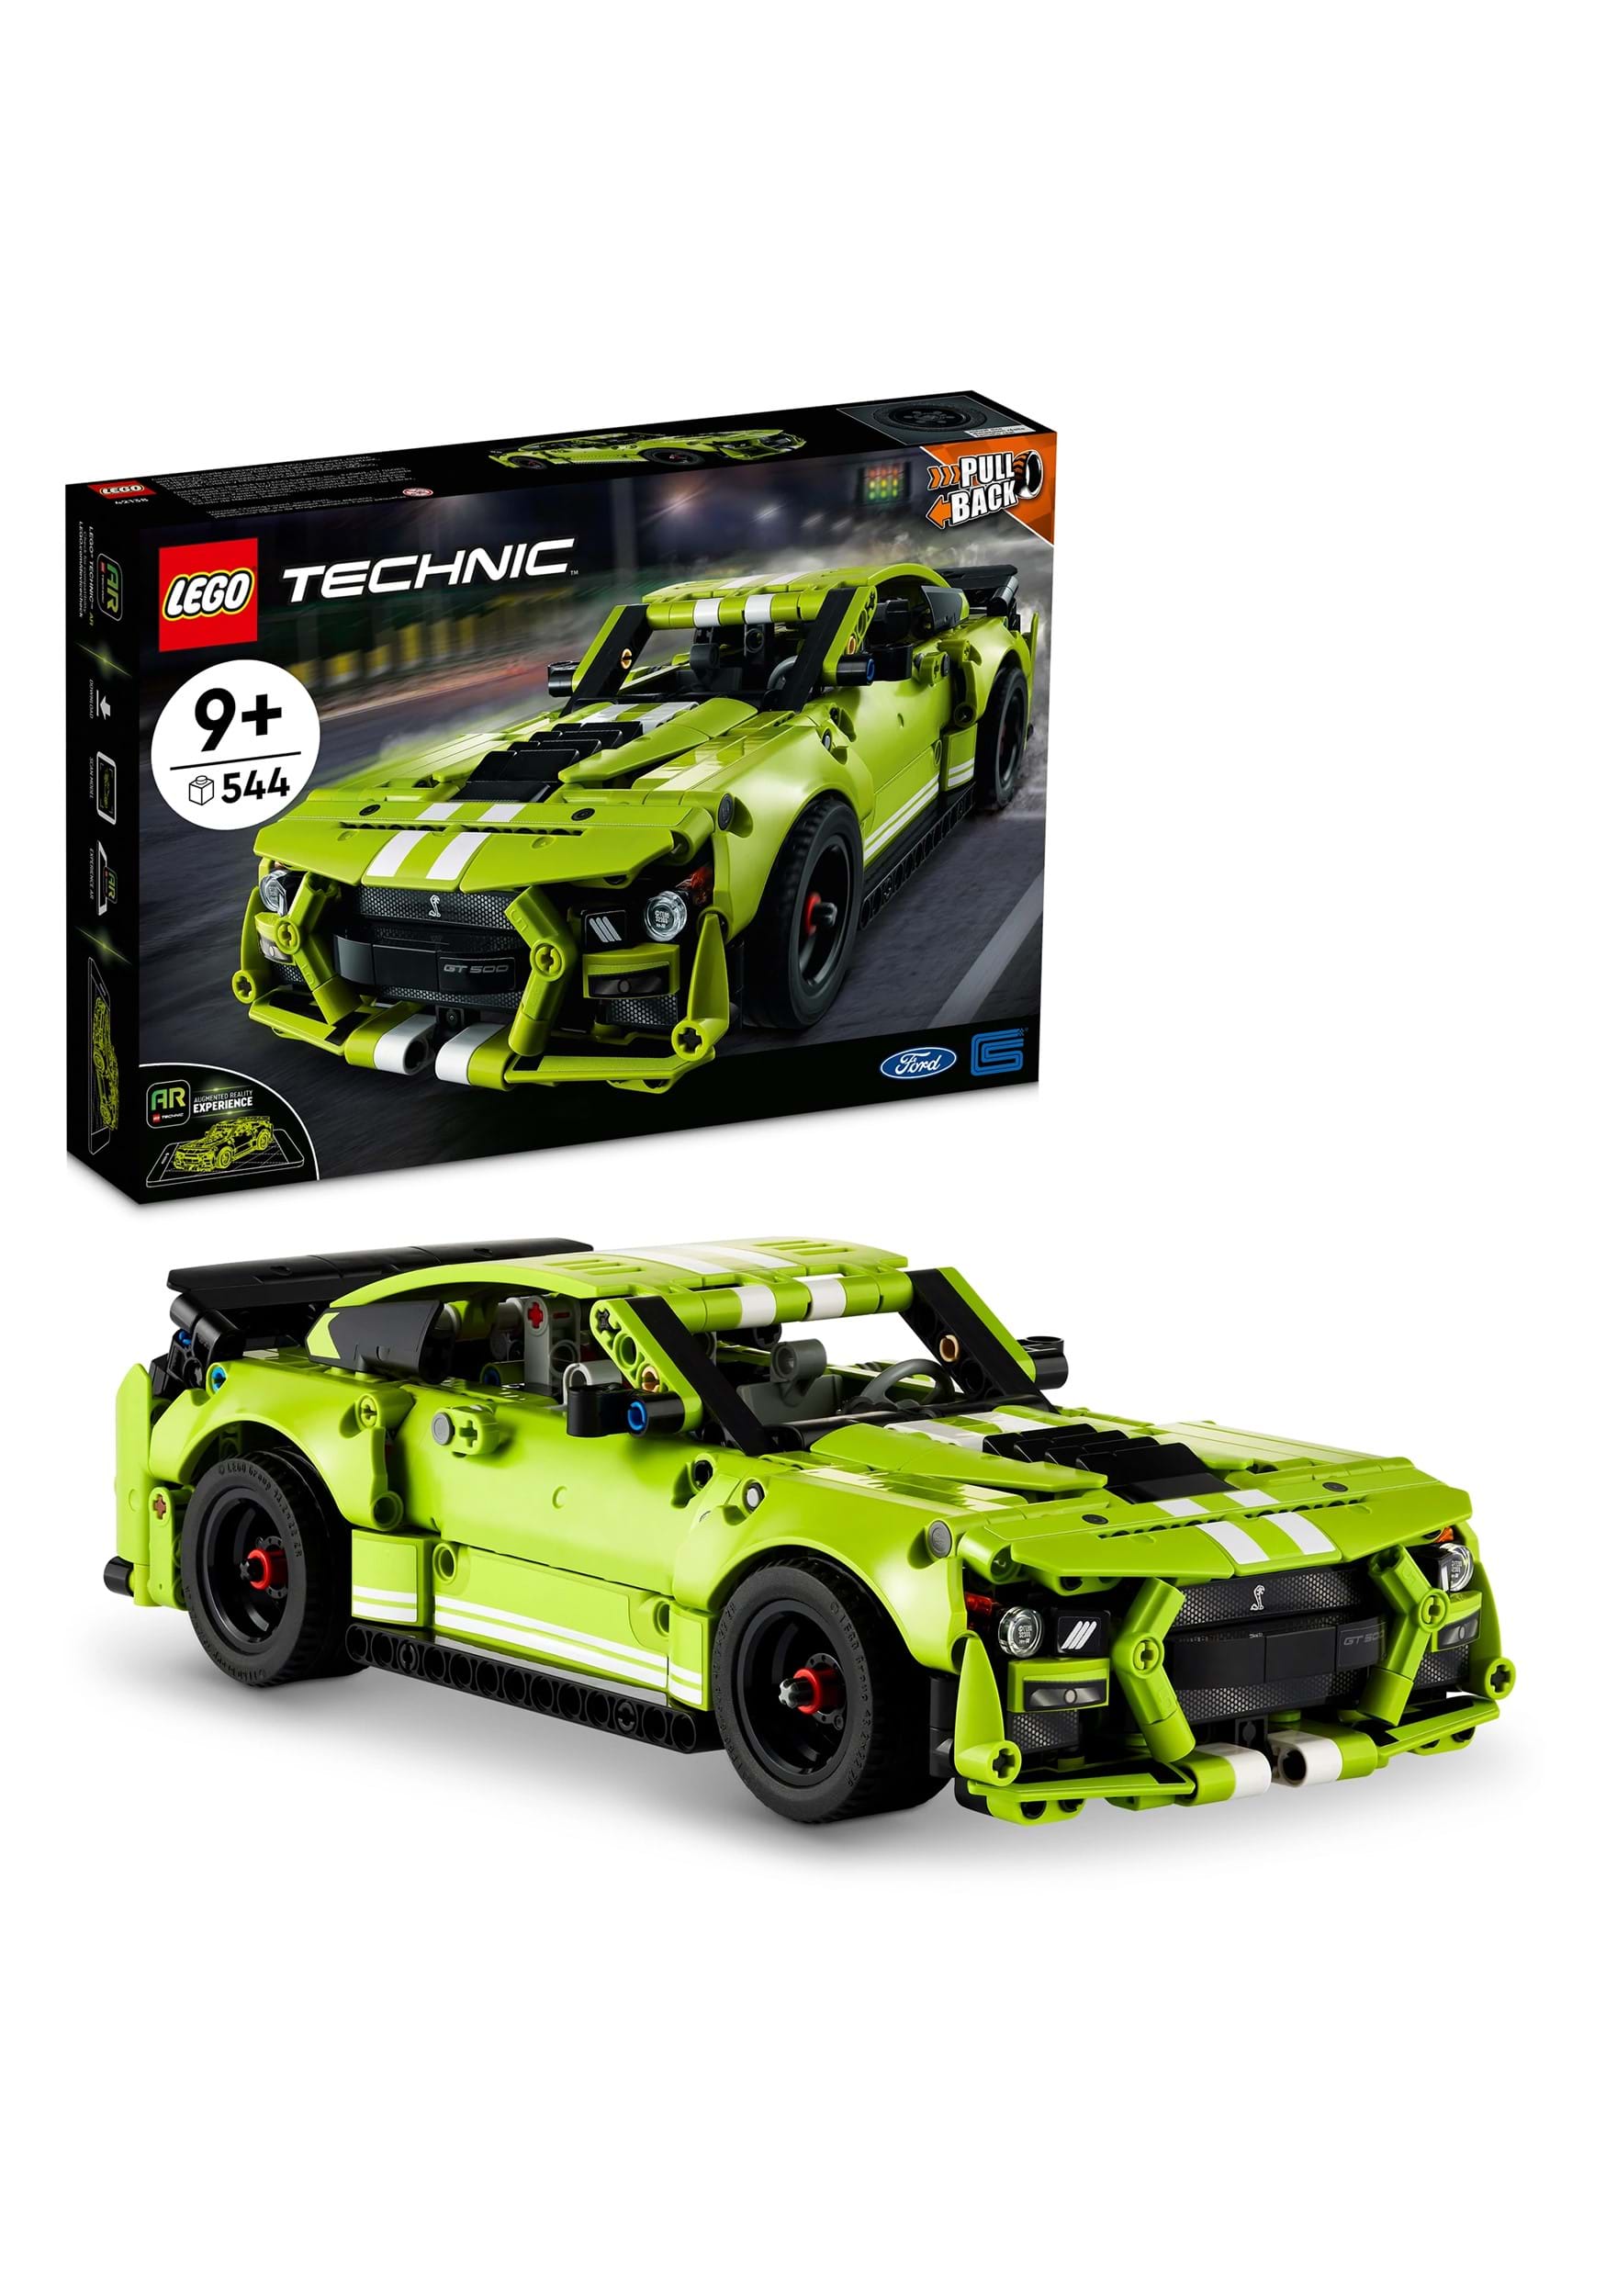 LEGO Technic Ford Mustang Shelby GT500 Building Kit